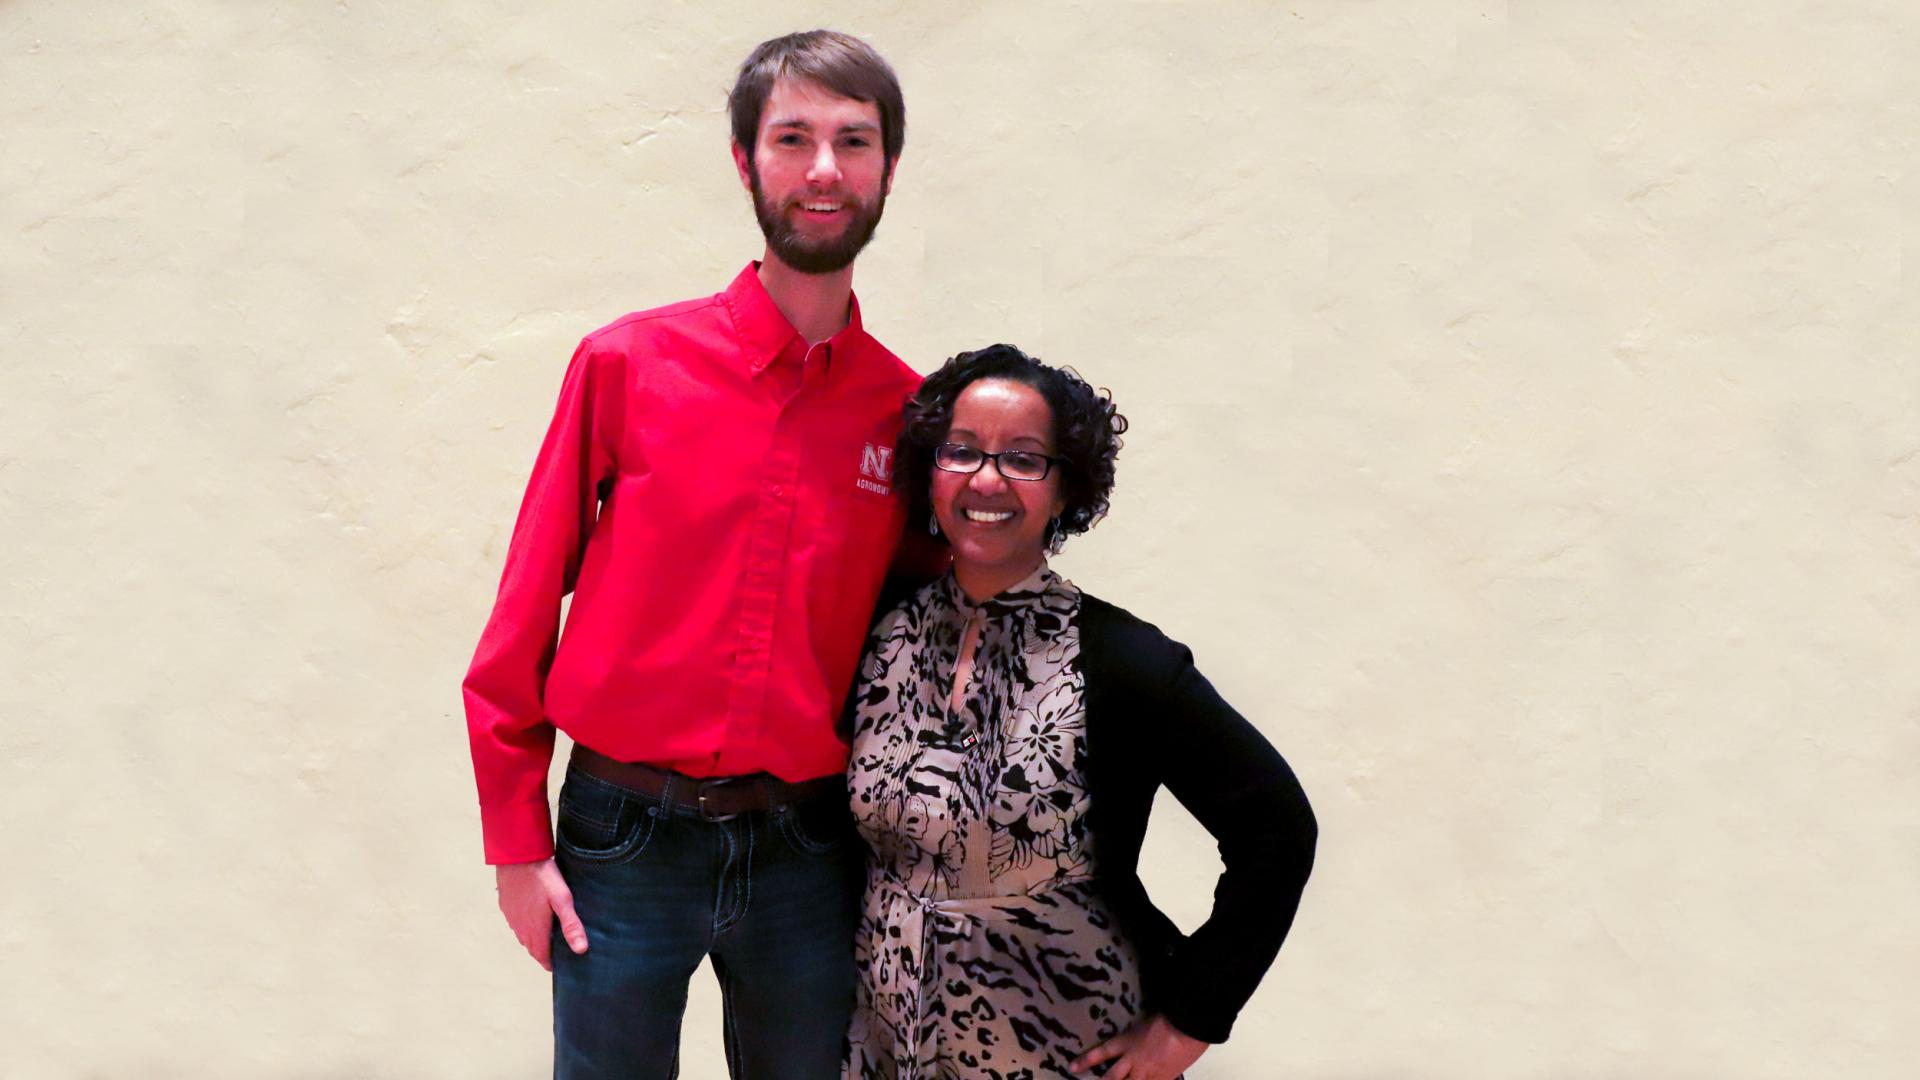 Kolby Grint, left, recipient of the Martin Massengale Outstanding Senior Award, with Martha Mamo, Department Head